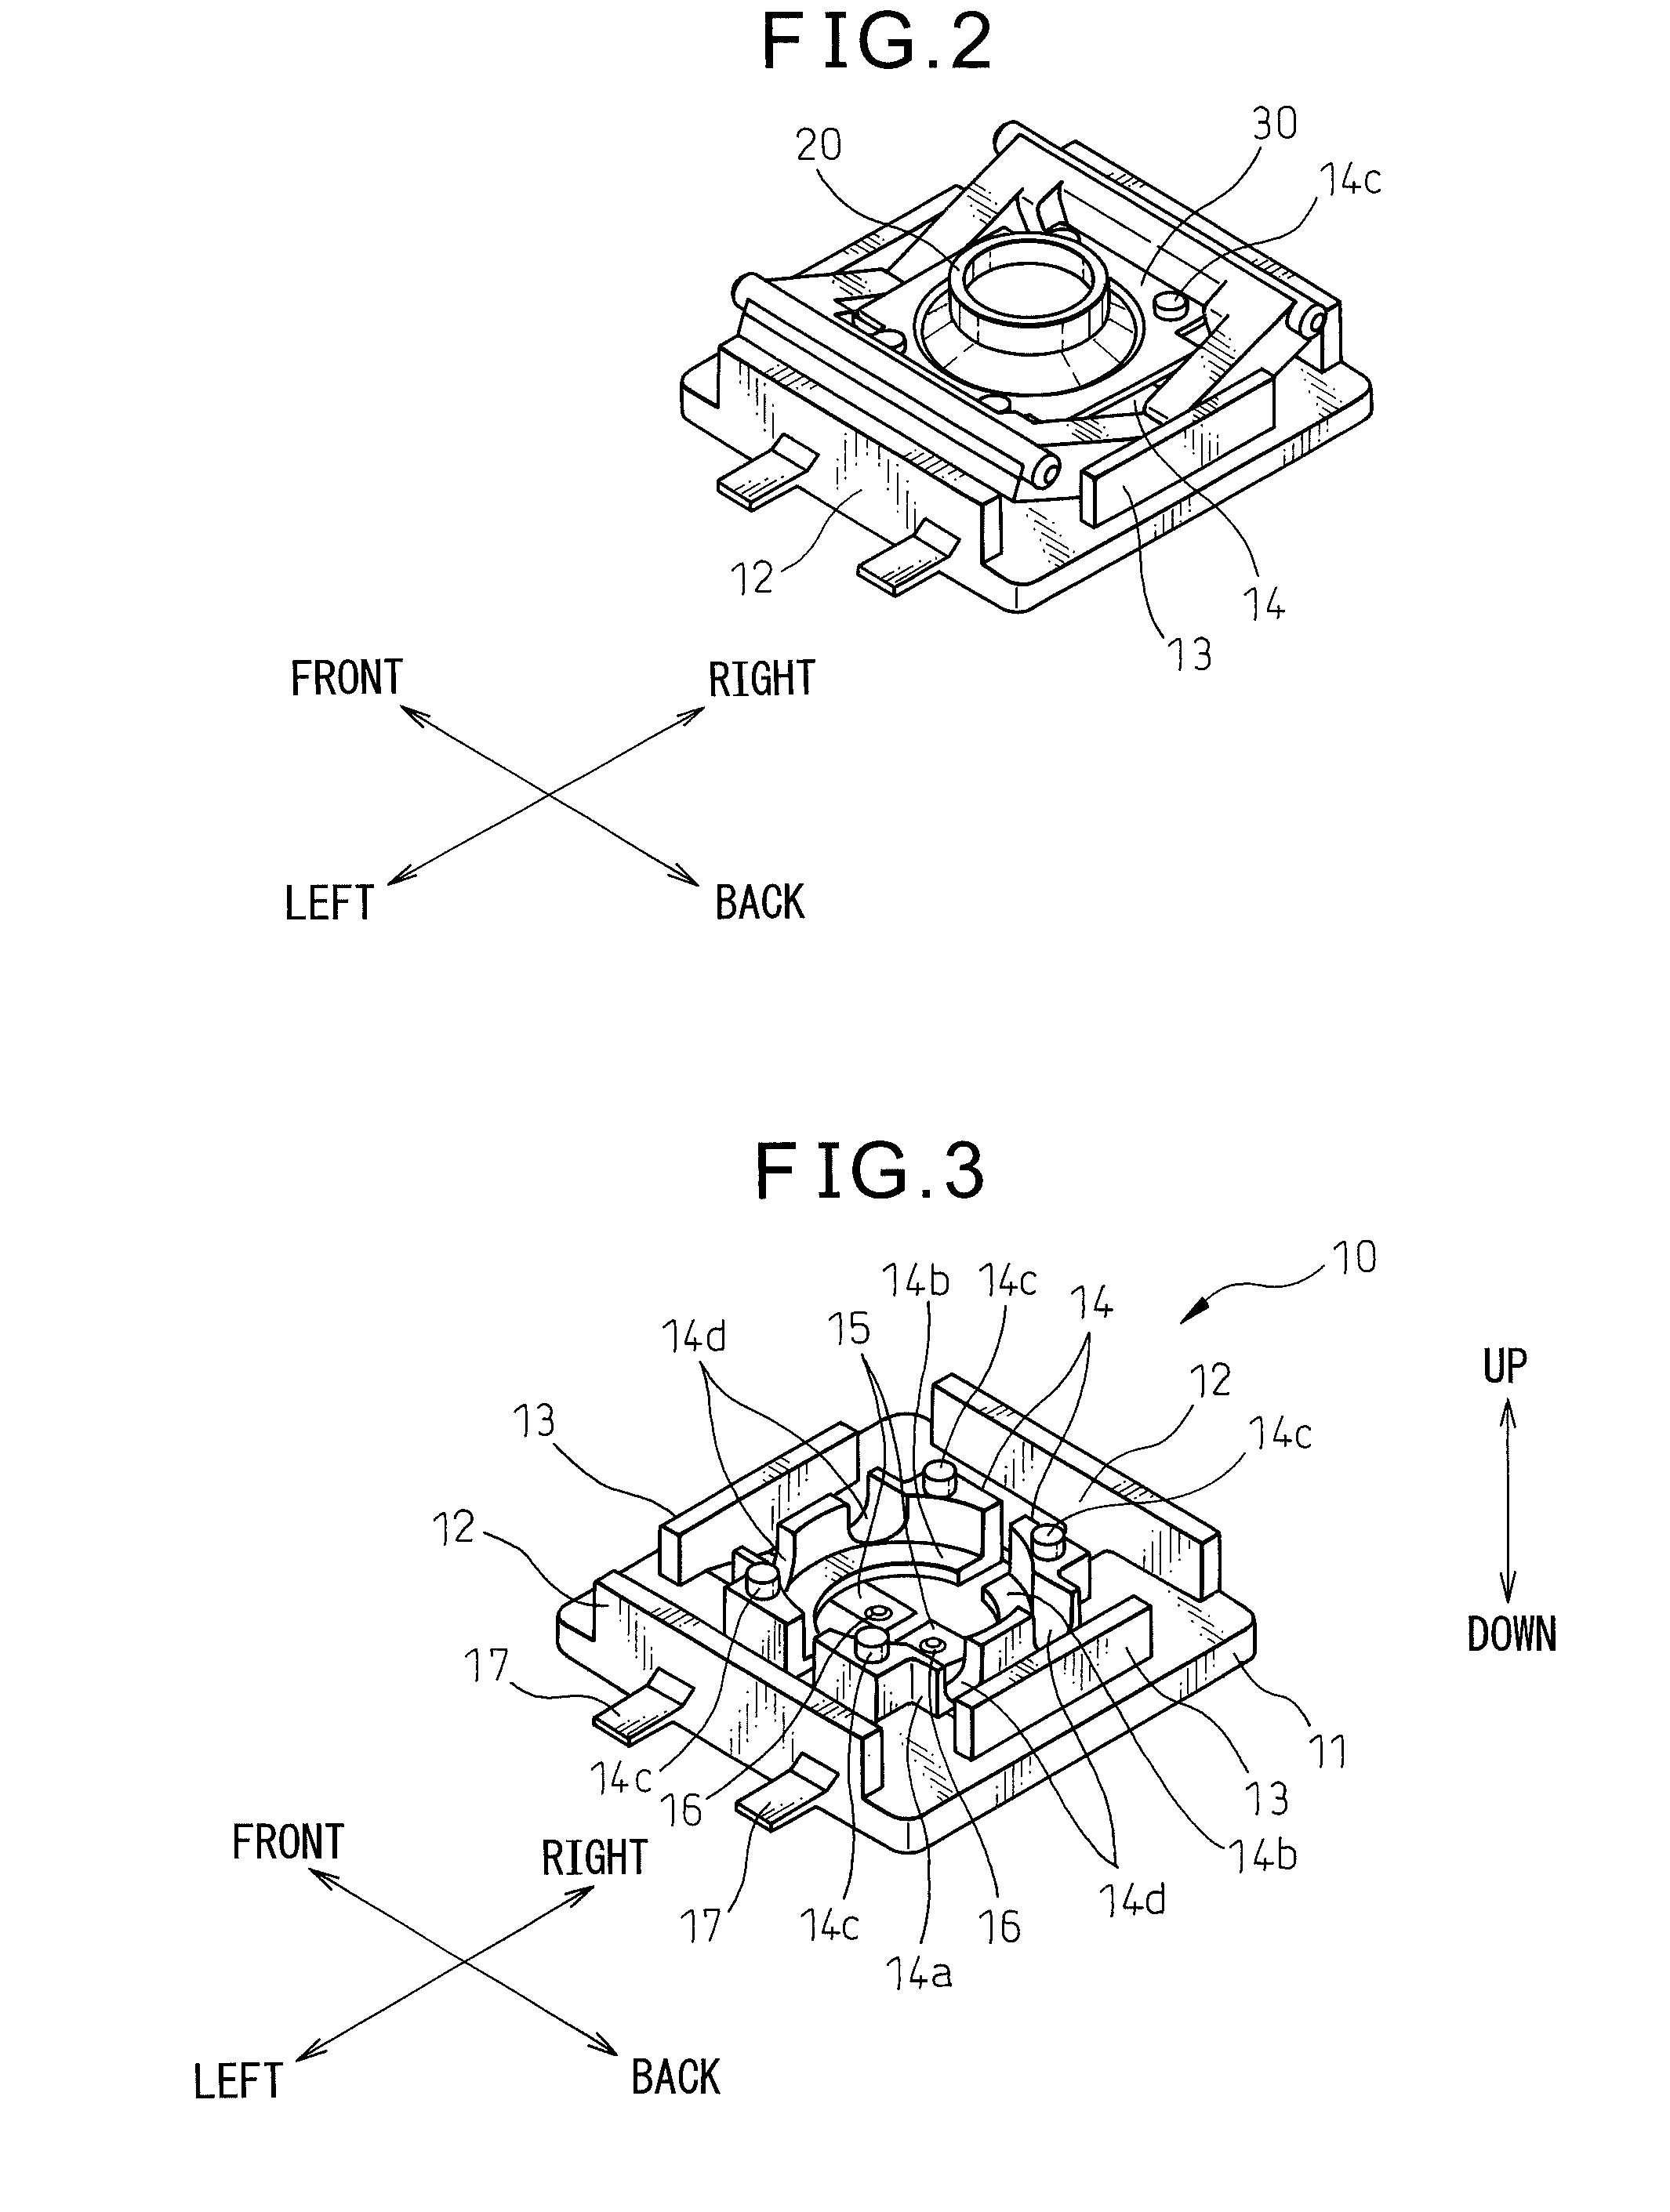 Push button-type switch device